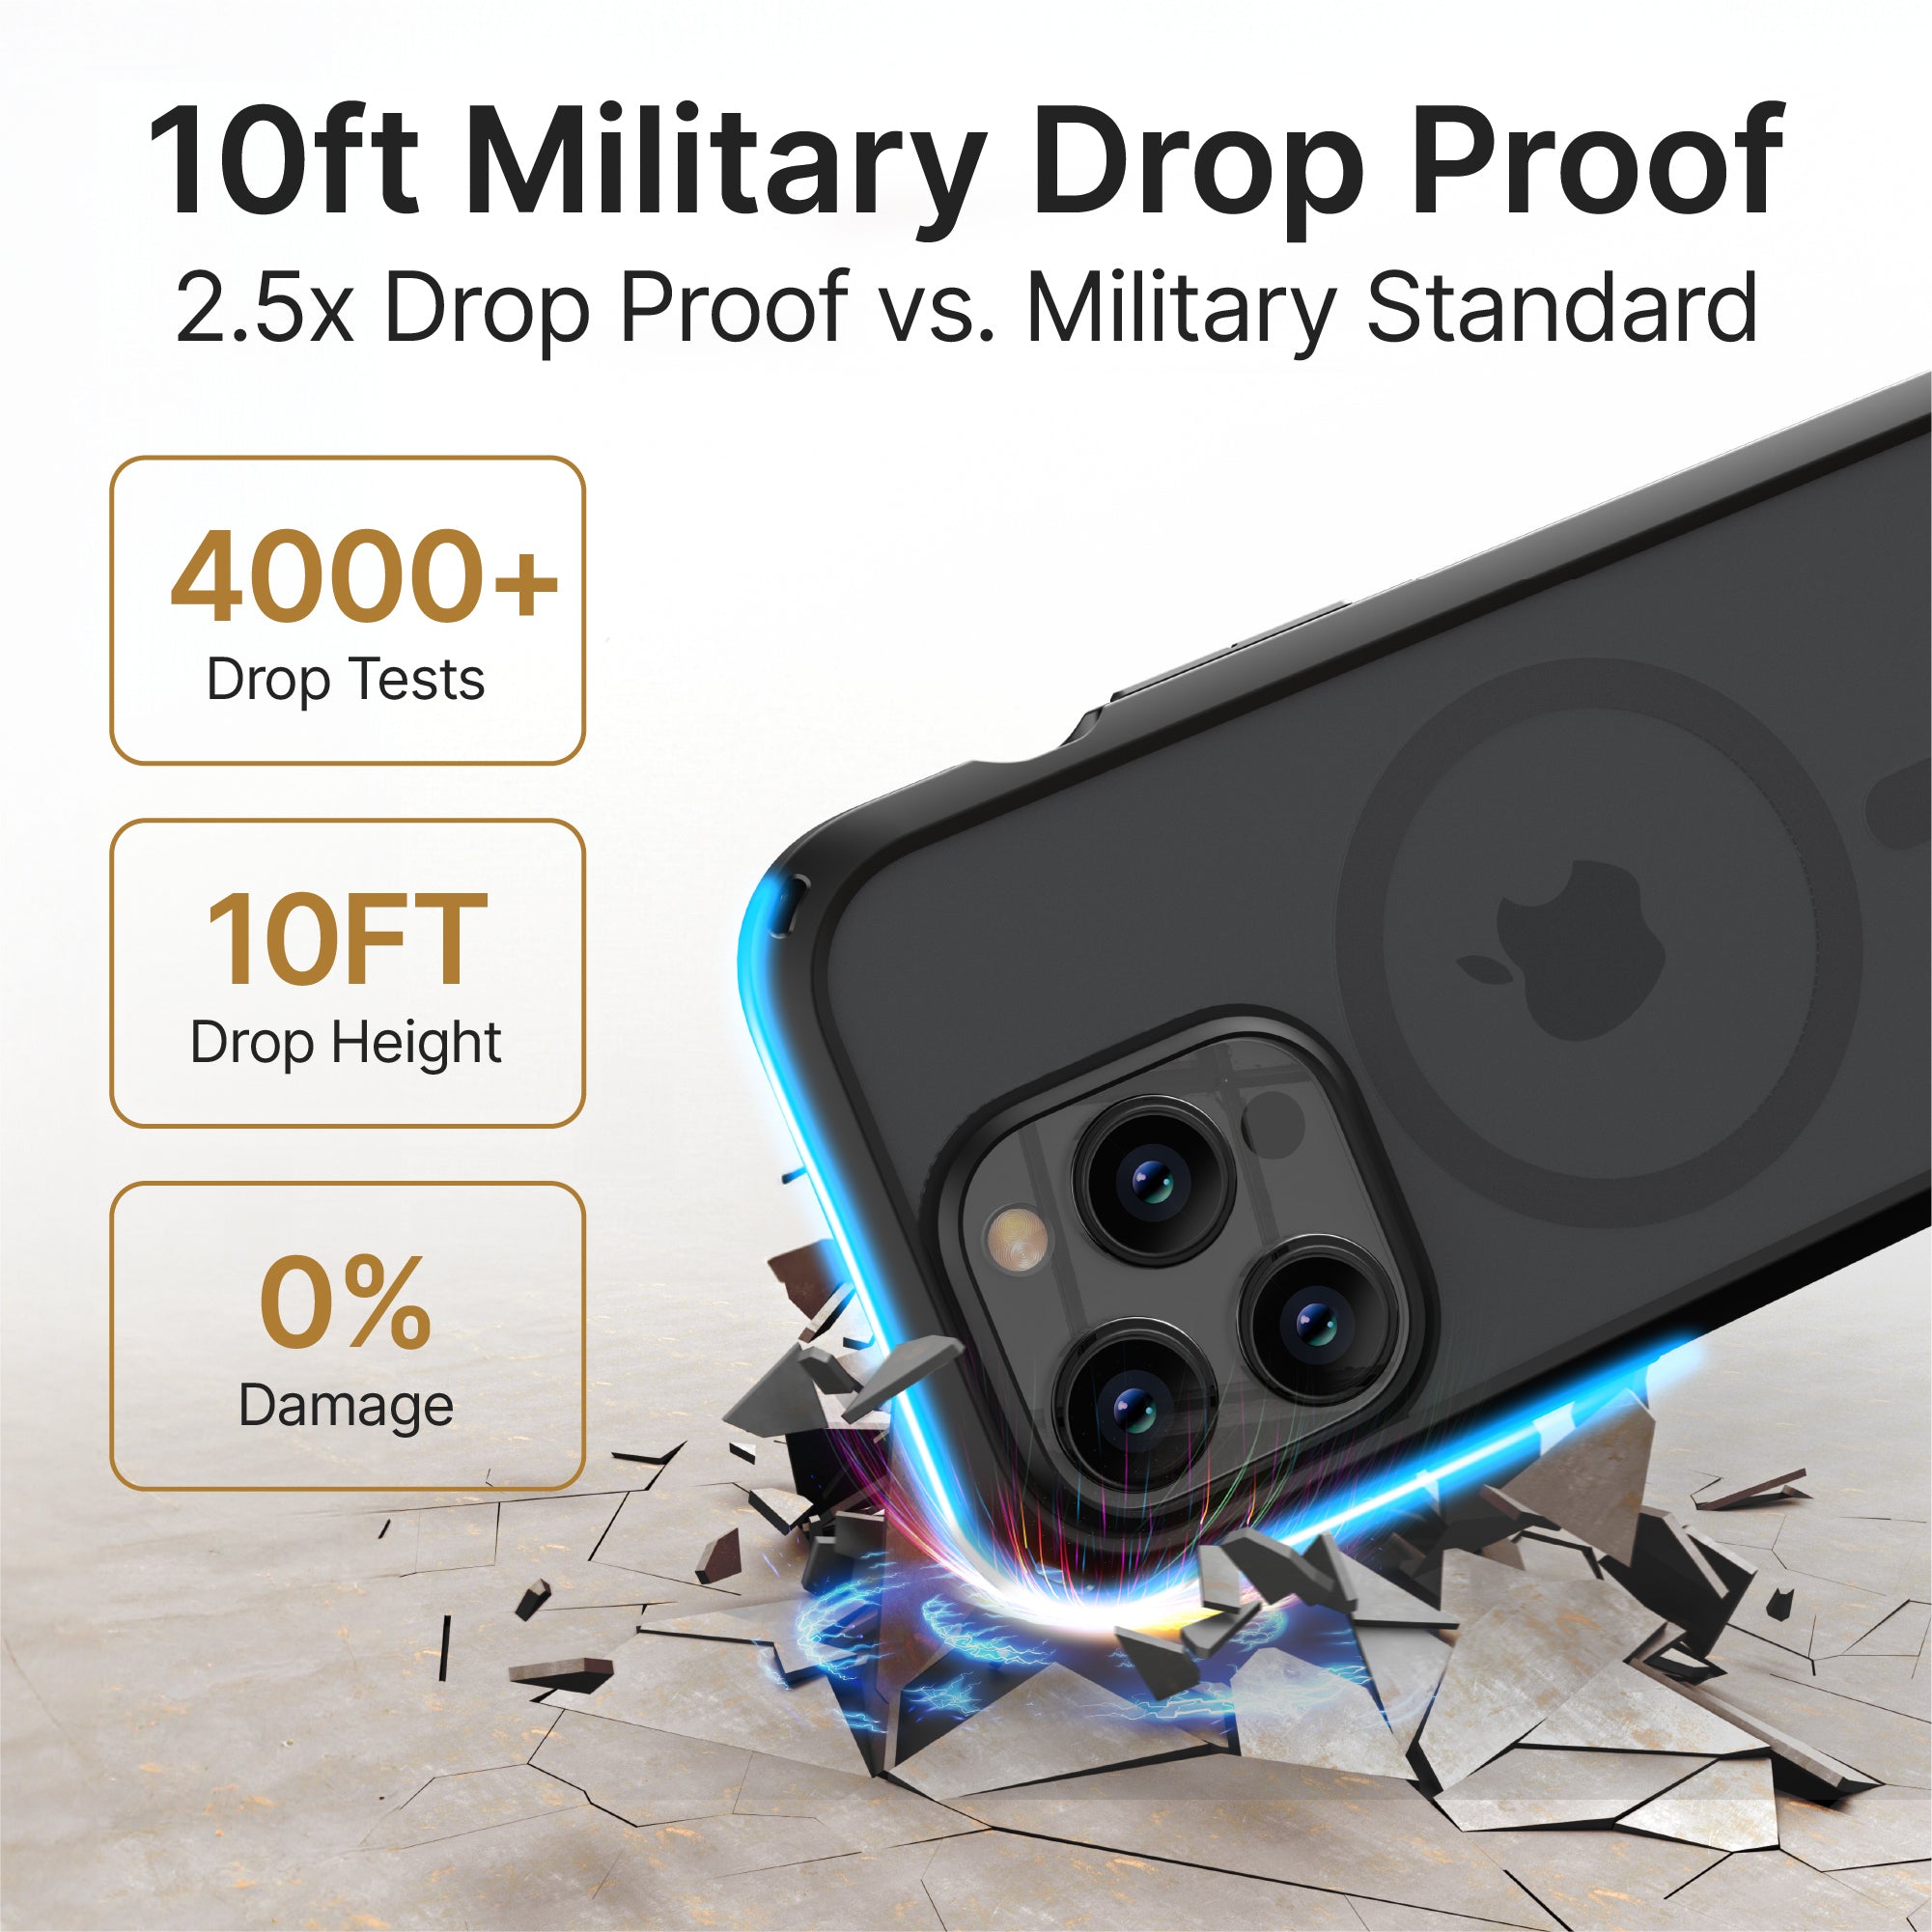 catalyst iphone 15 series influence case magsafe compatible stealth black for iphone 15 pro max with cracked floor text reads 10ft military drop proof 2.5x drop proof vs military standard 4000+ drop tests 10ft drop height 0% damage